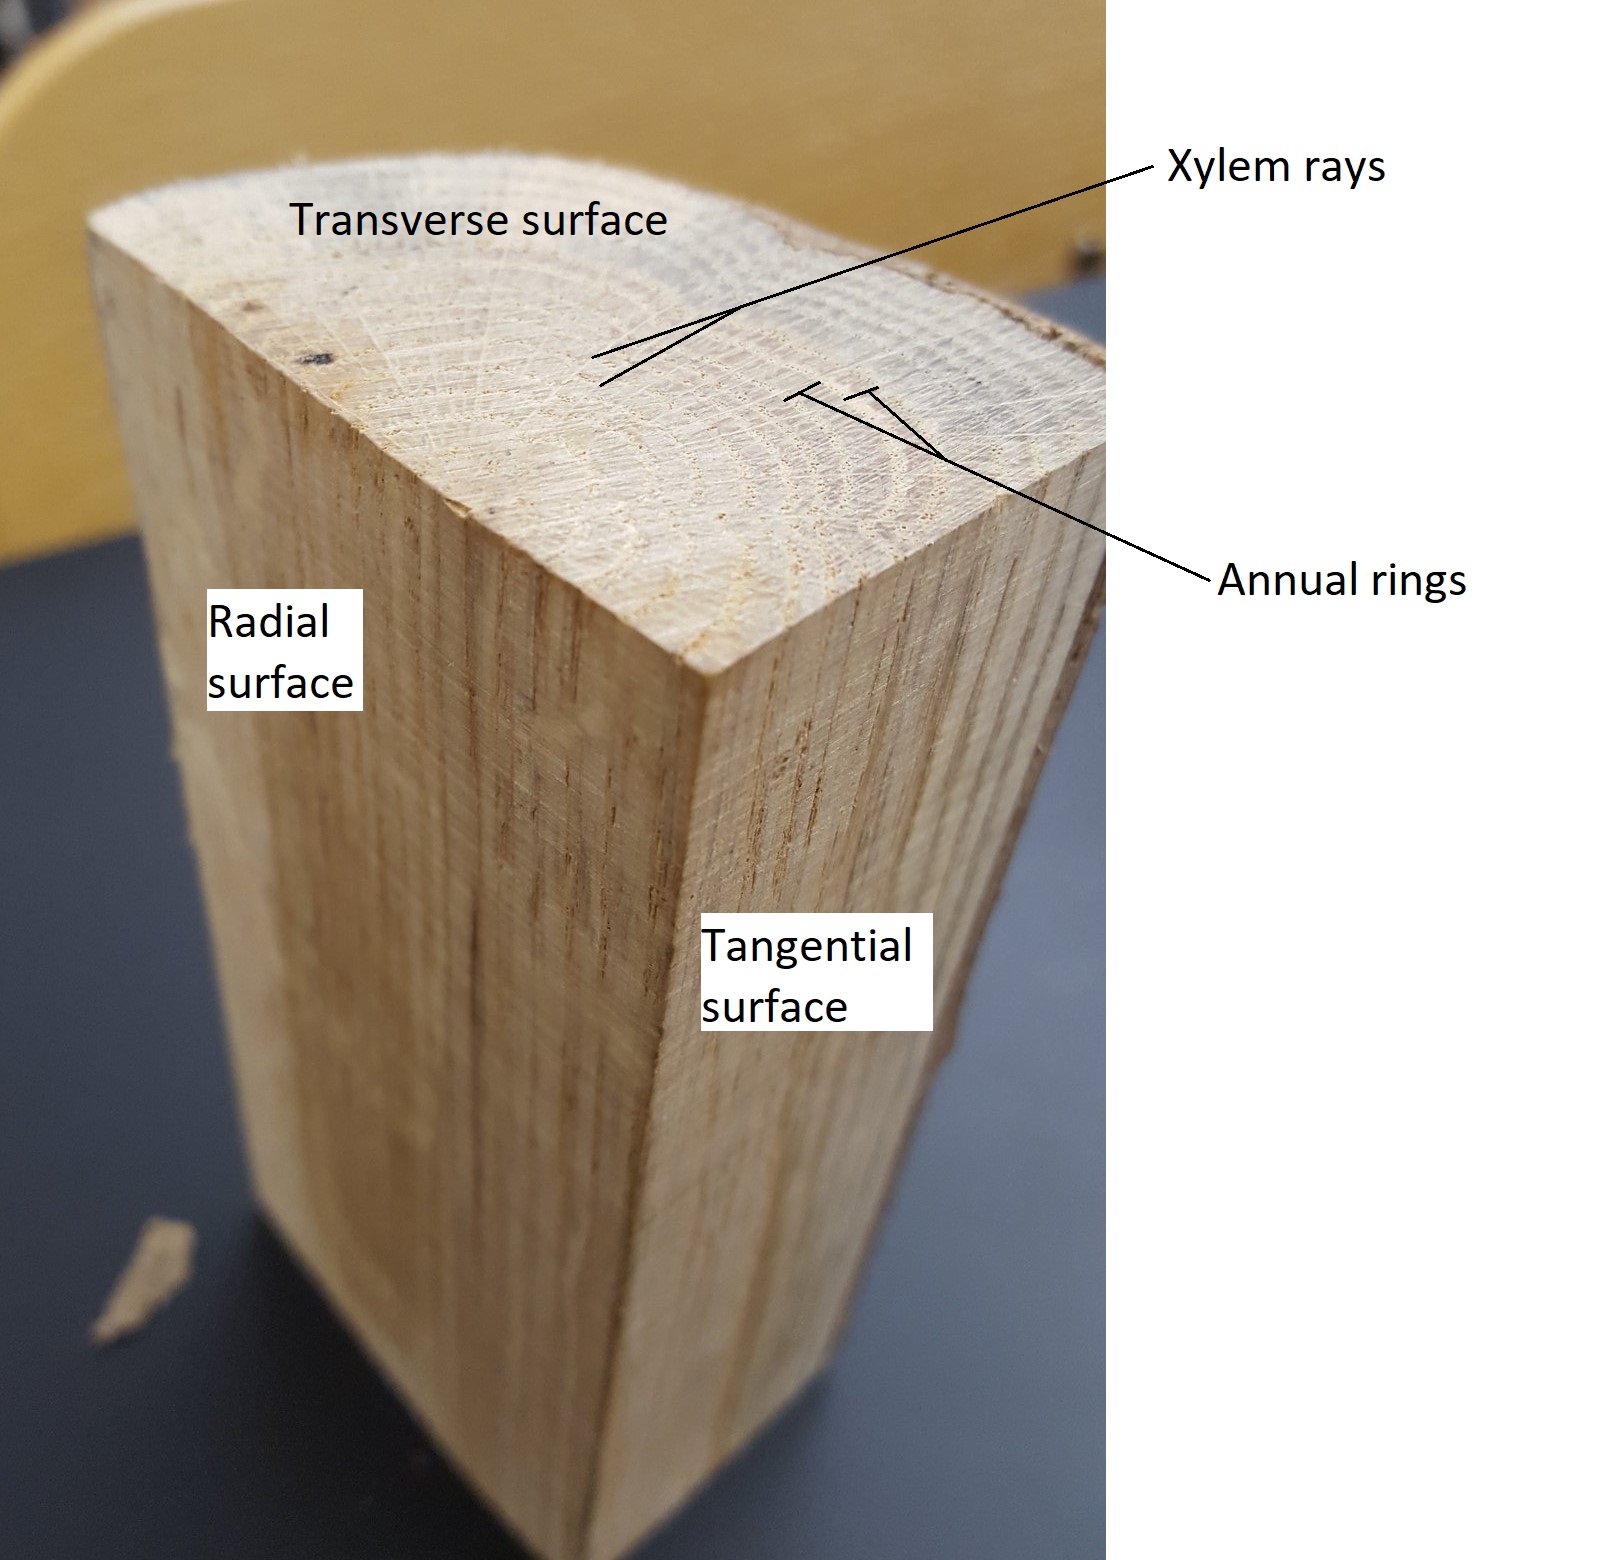 Small round of oak wood showing transverse, radial, and tangential surfaces.